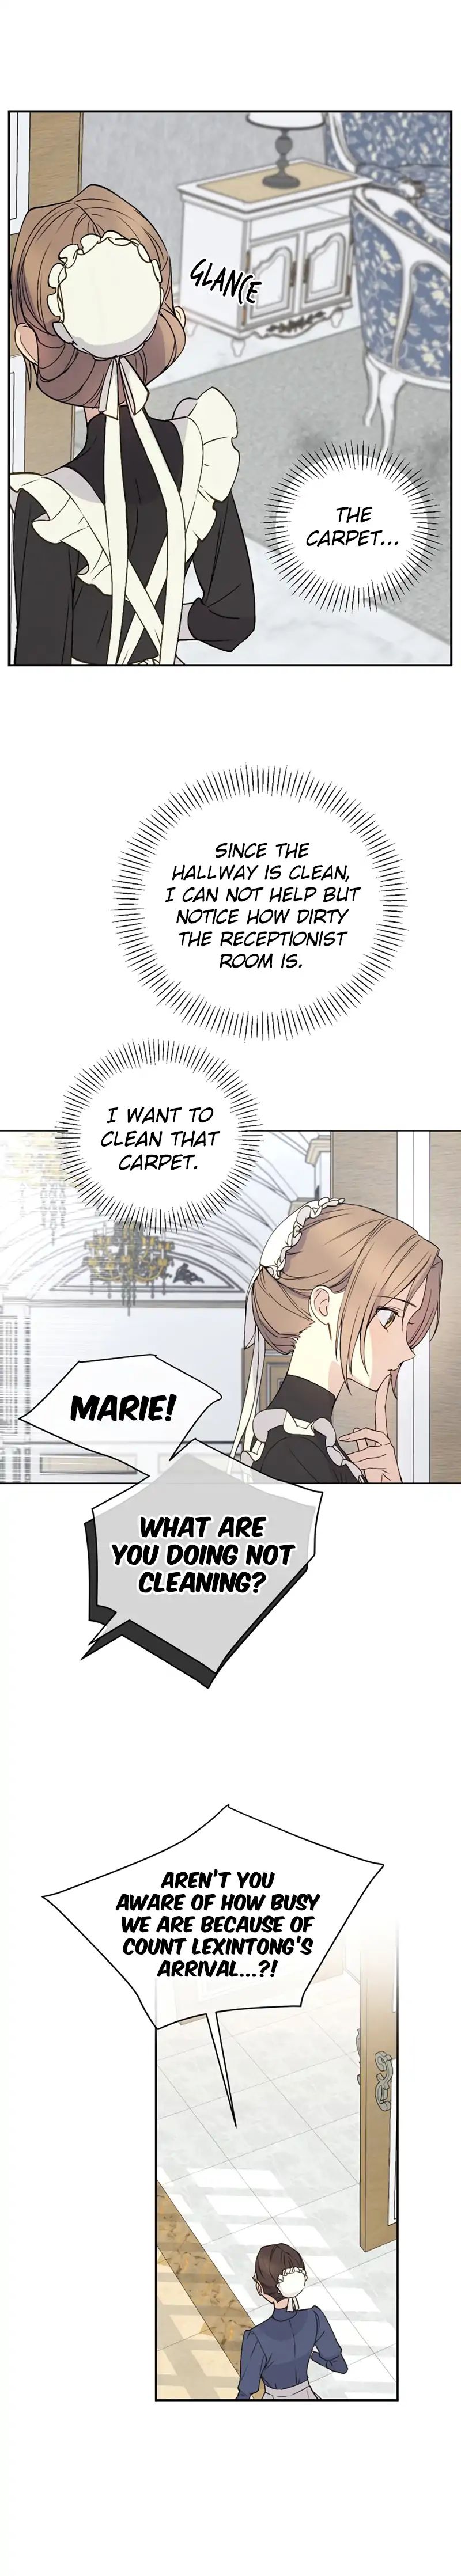 A Capable Maid chapter 2